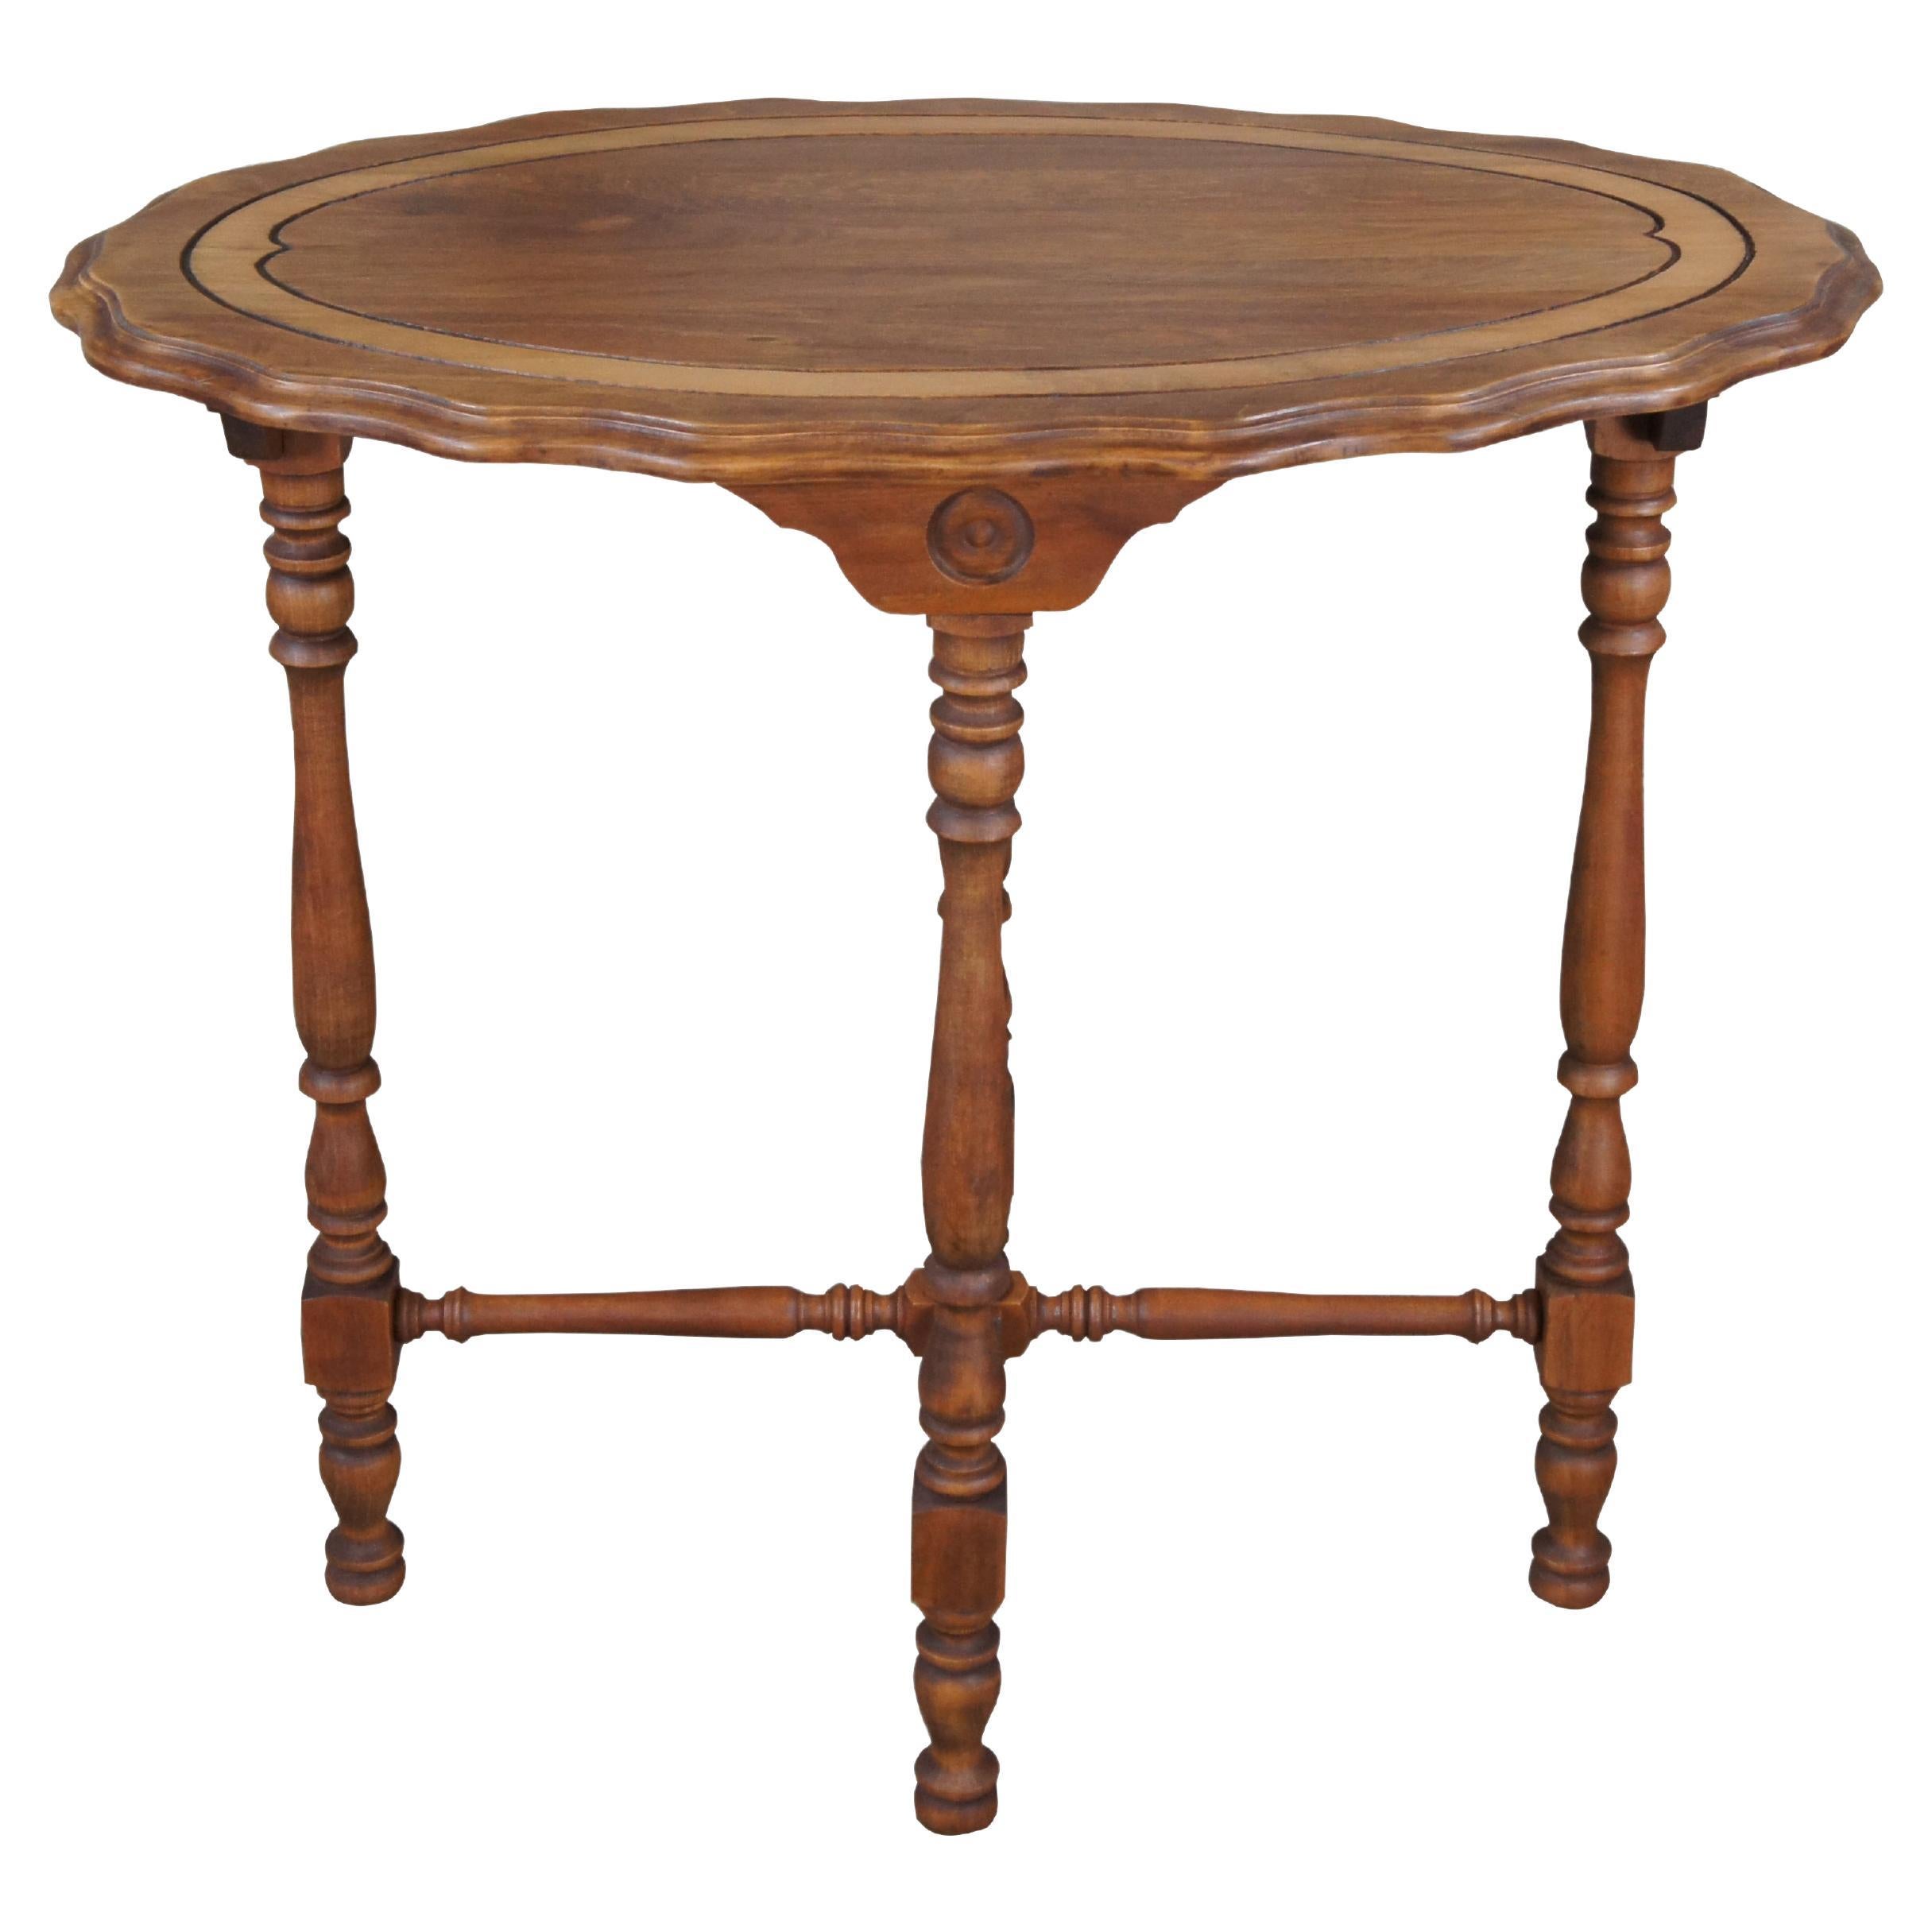 Antique Eastlake Victorian Maple Oval Scalloped Serpentine Parlor Side Table  For Sale